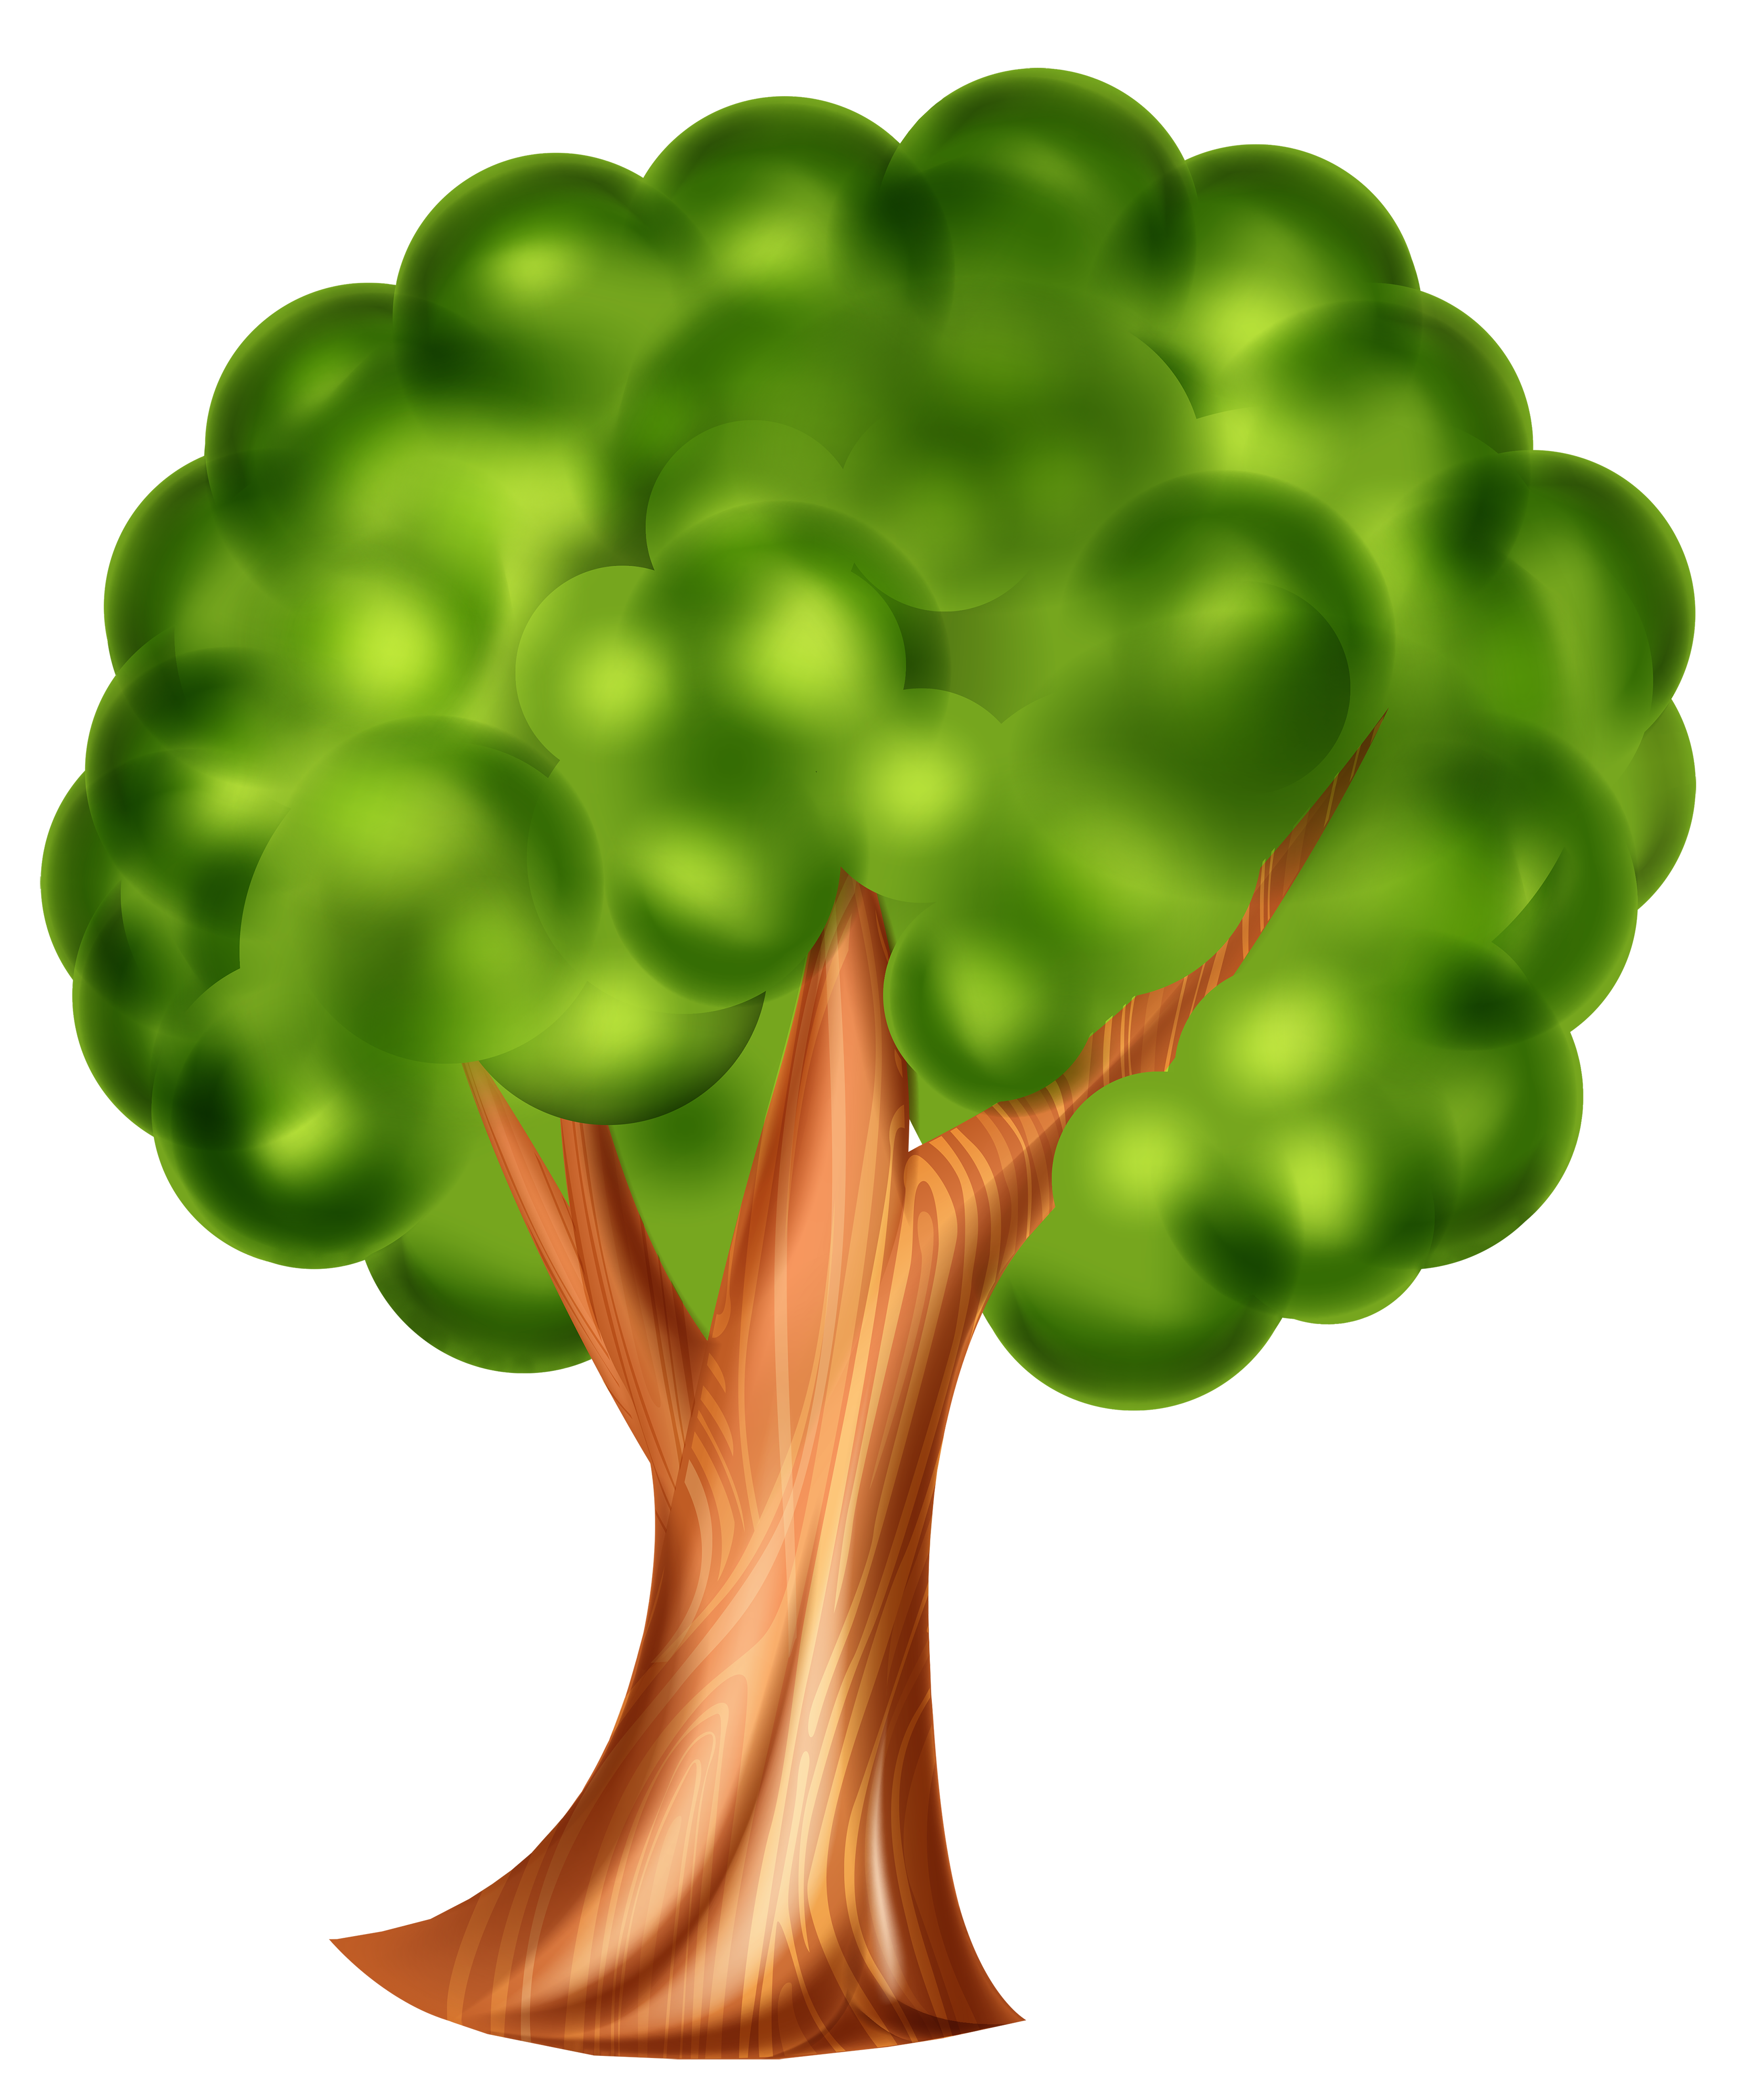 30 Tree cliparts png format for free download on Saurabh.